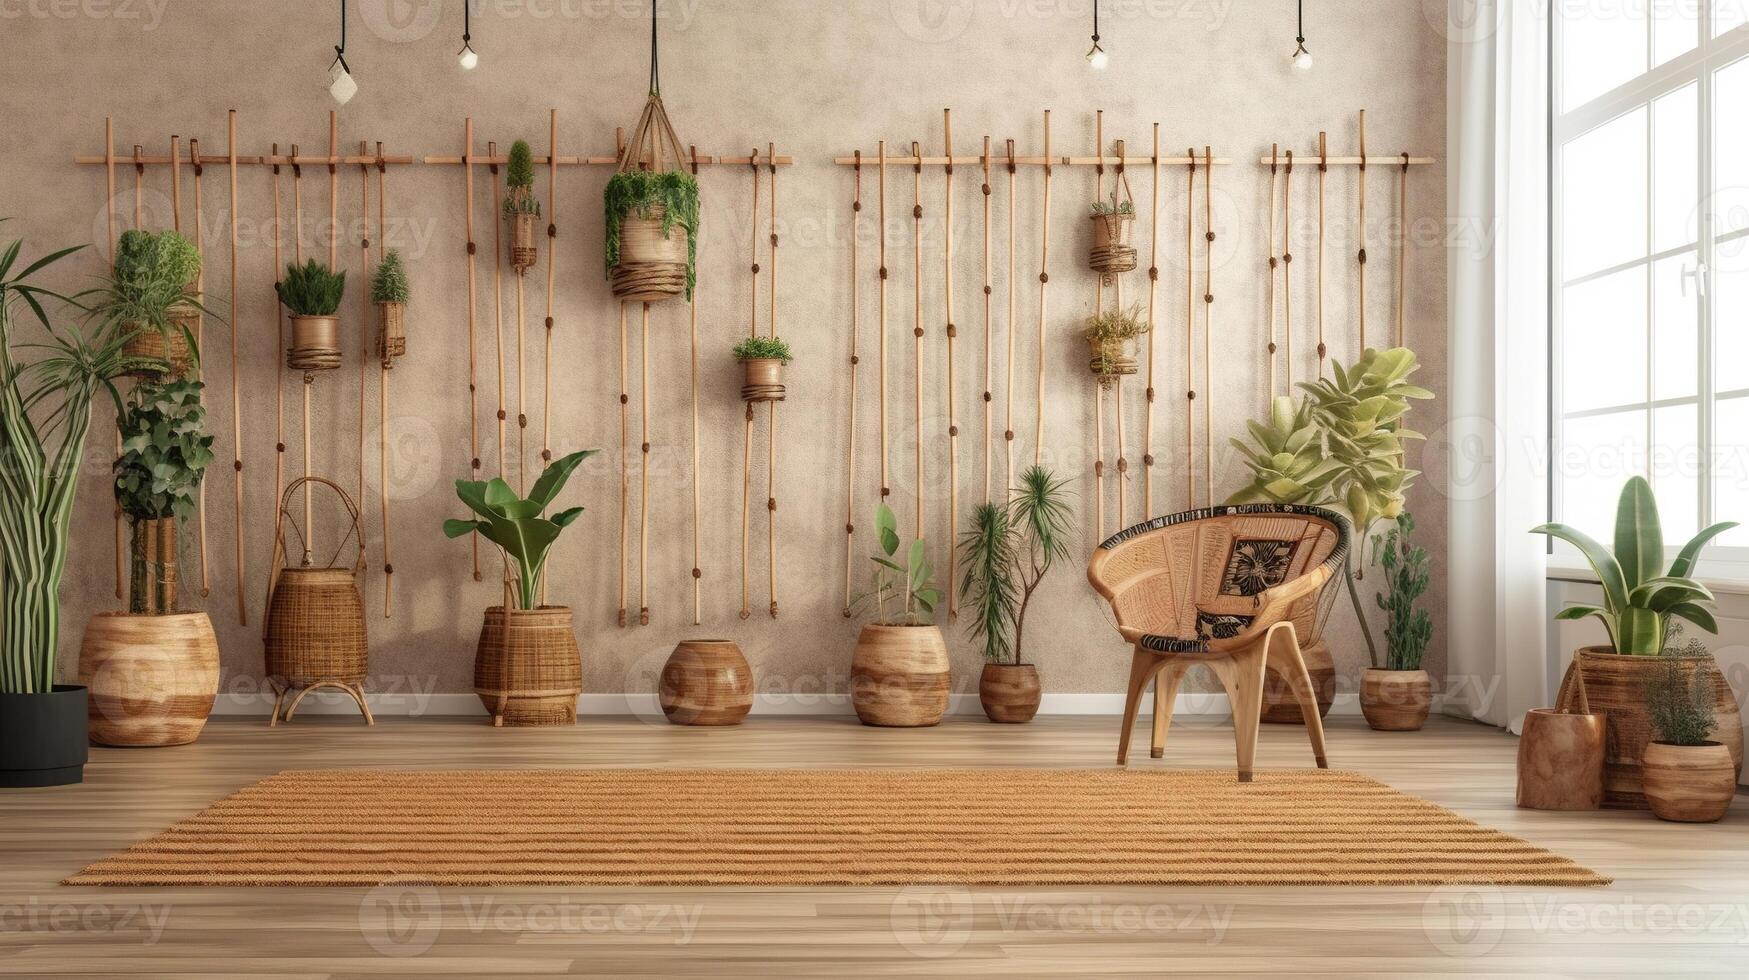 , Eco wooden room with plants with natural furniture, boho ethnic chic style interior design photo